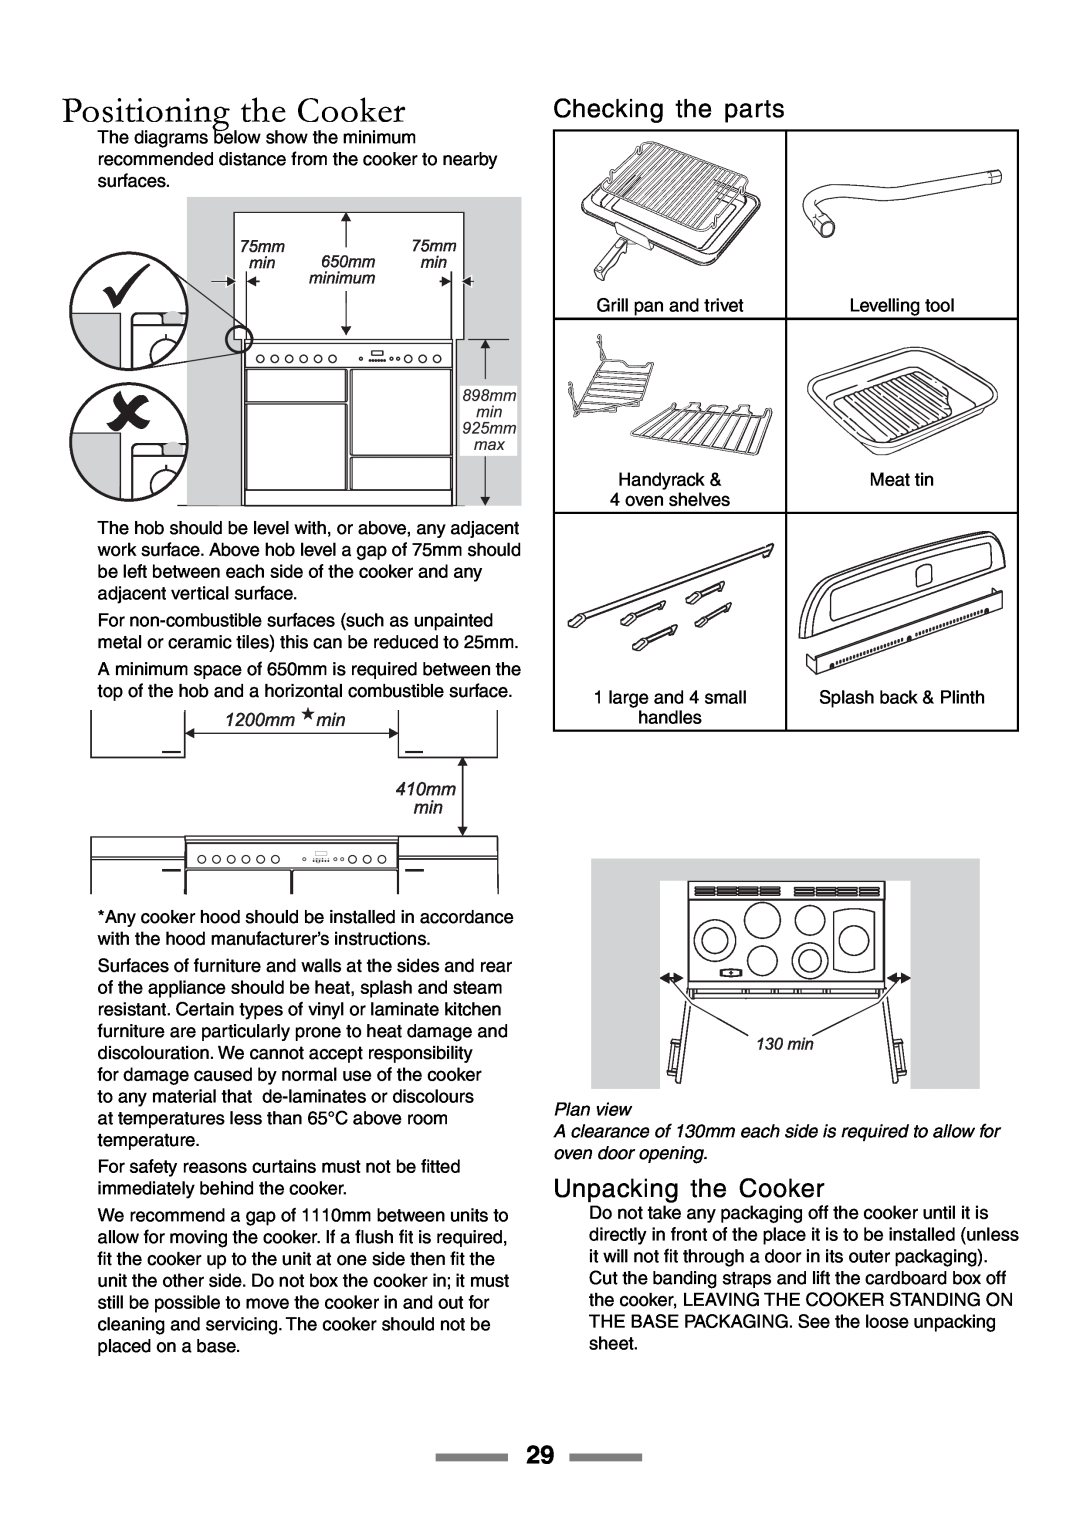 Rangemaster U105510-01 manual Positioning the Cooker, Checking the parts, Unpacking the Cooker, Plan view 